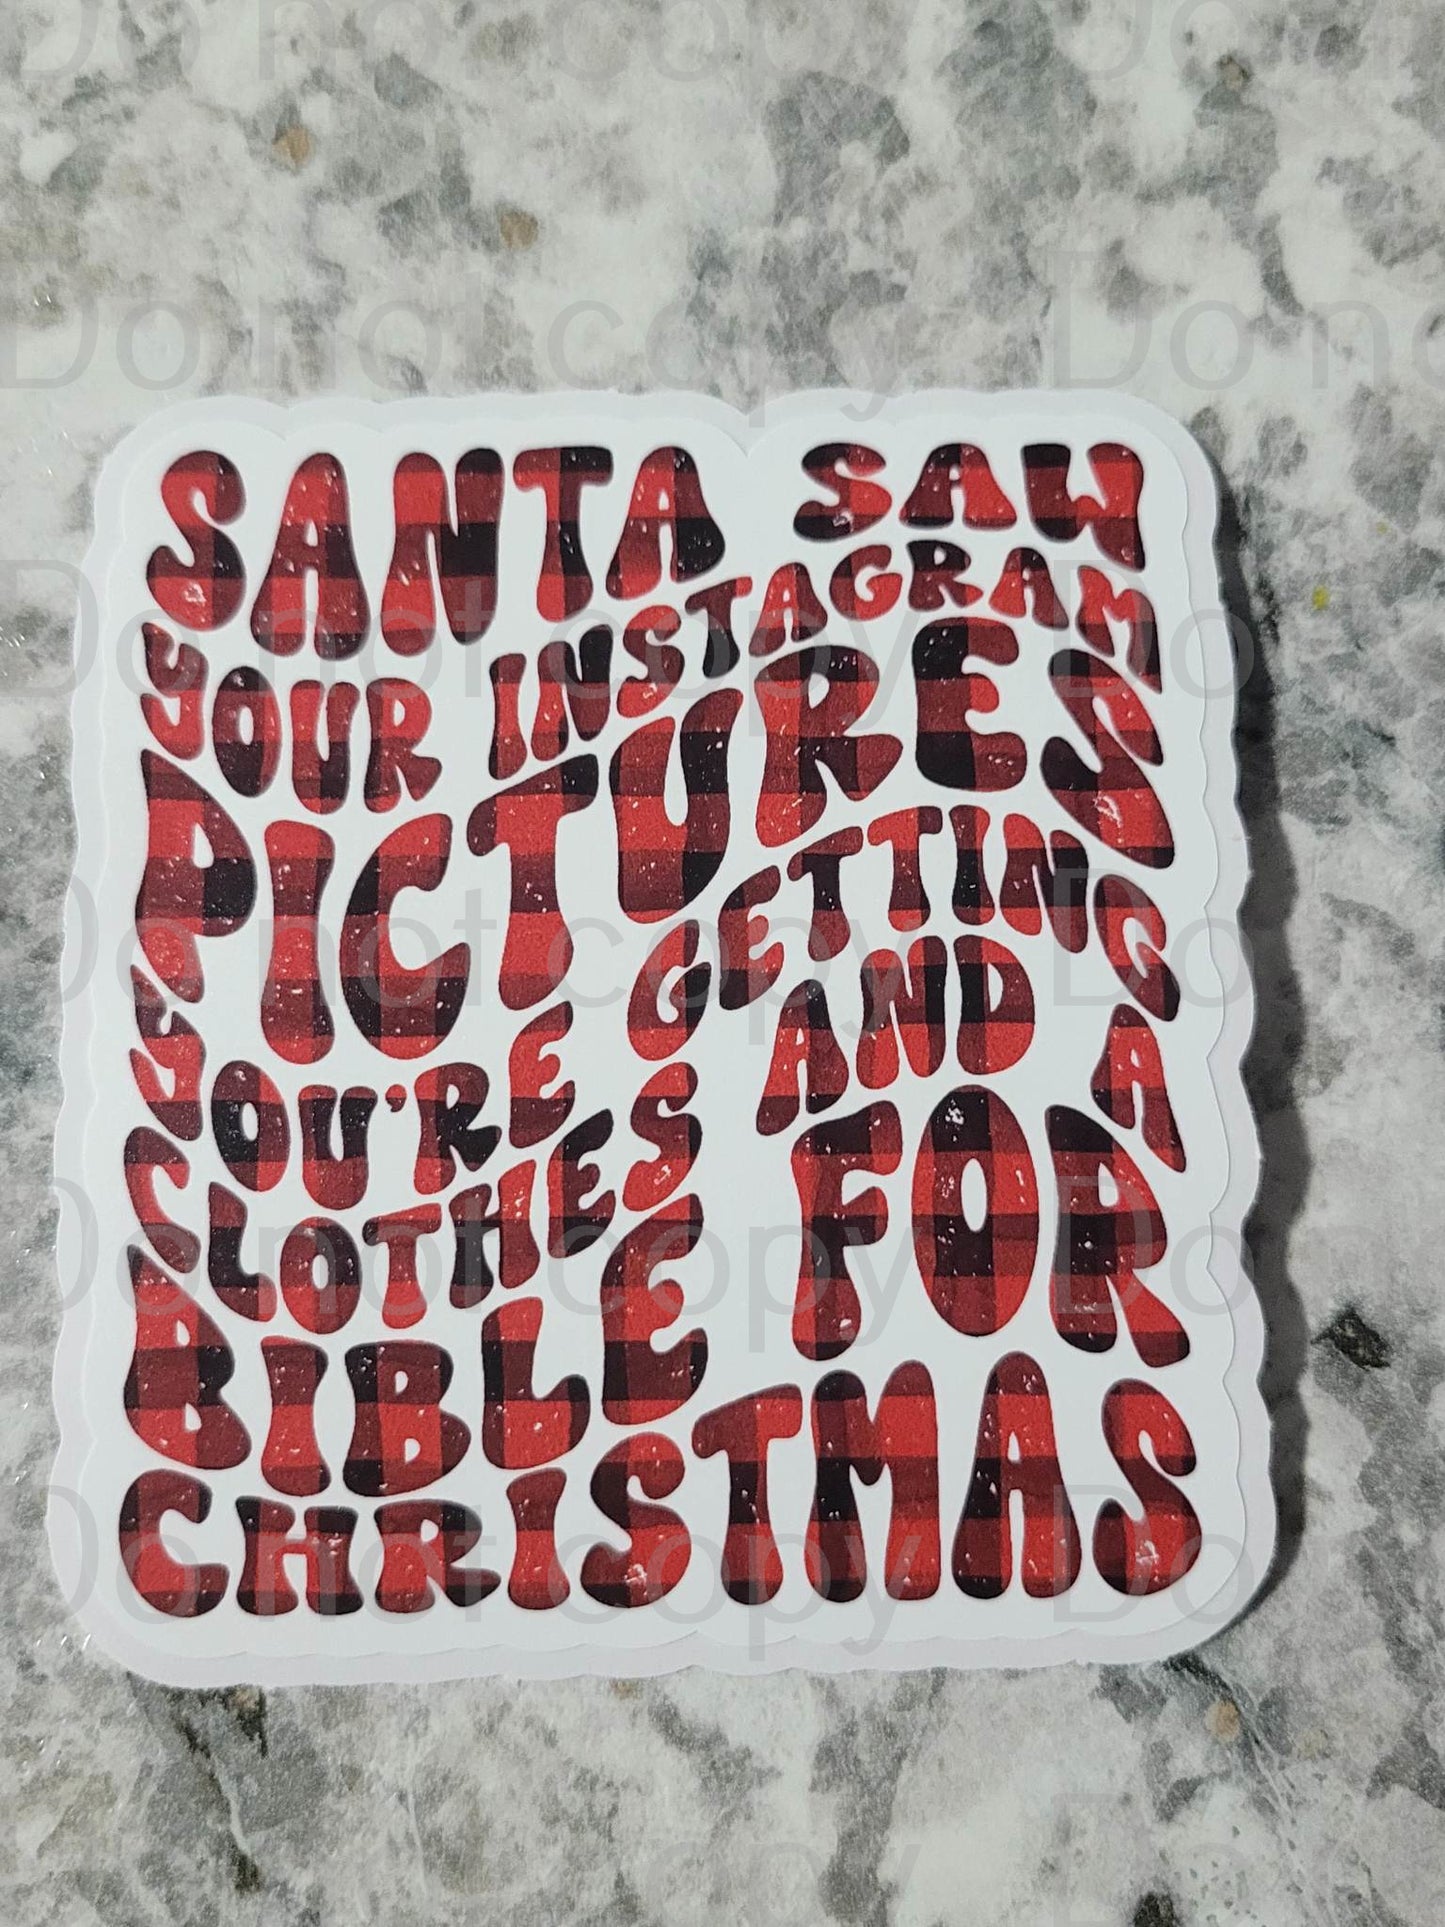 Santa saw your pictures you're getting clothes and a bible for Christmas Die cut sticker 3-5 Business Day TAT.